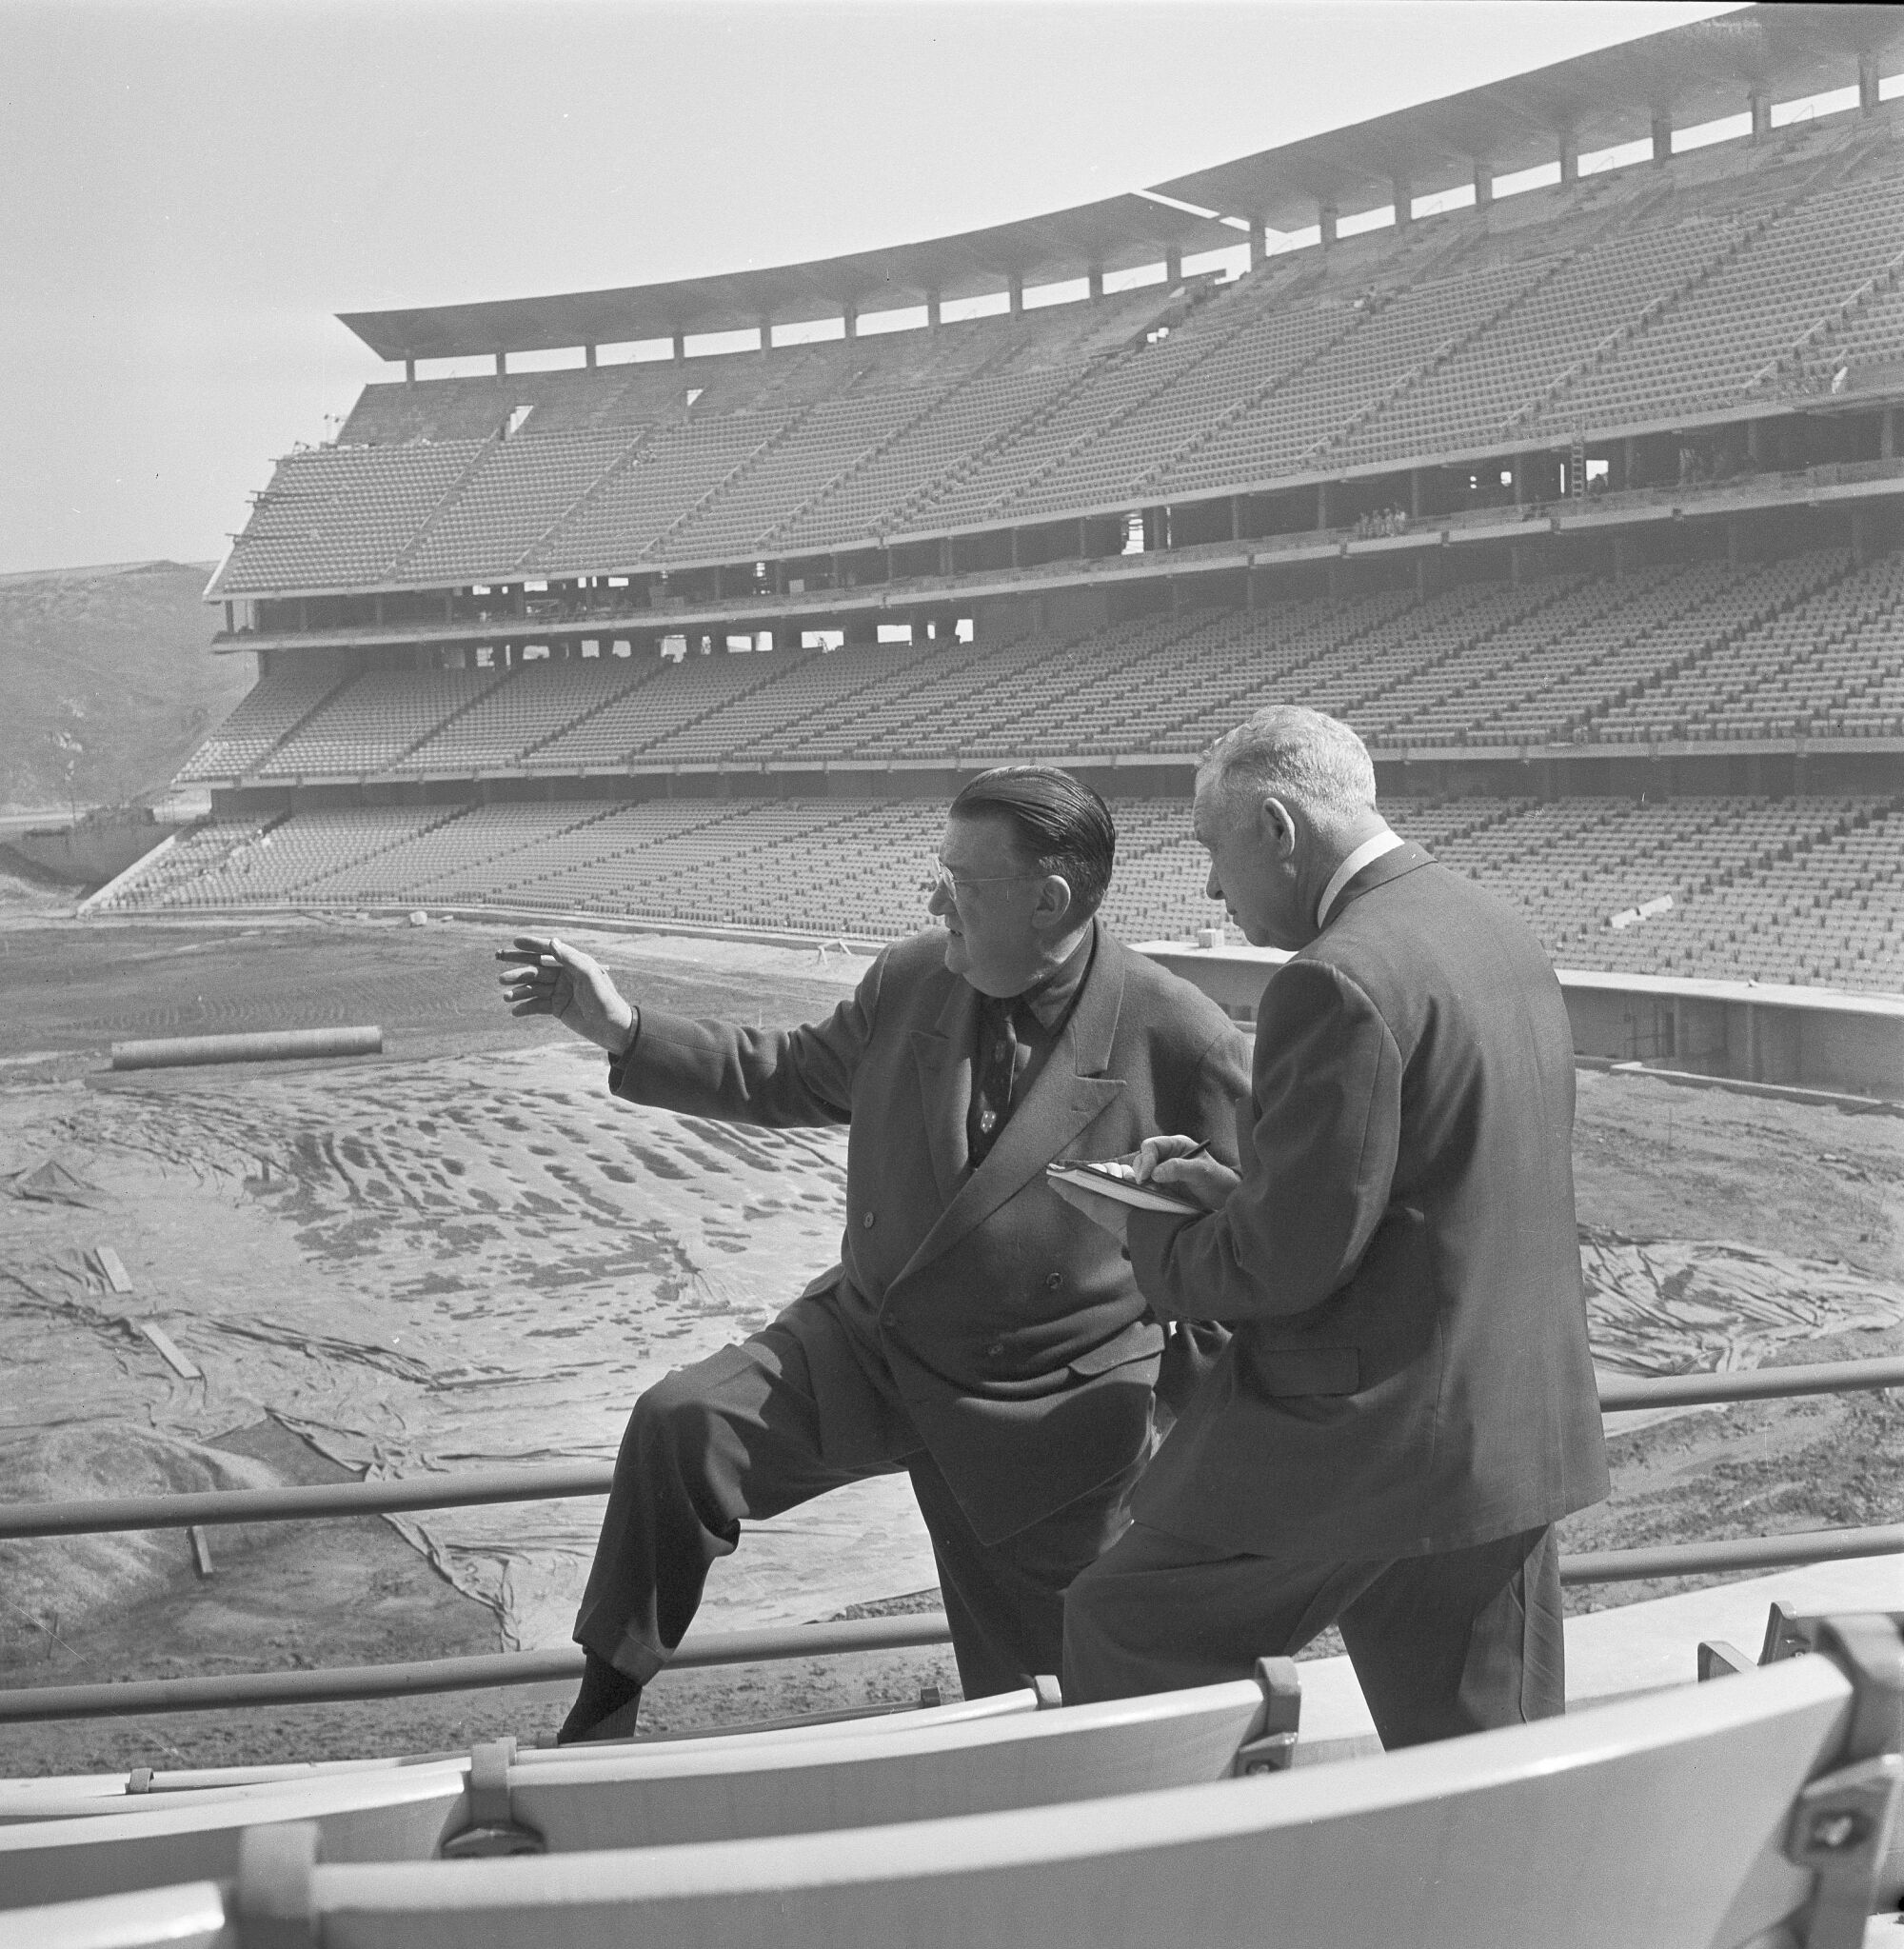 Dodgers president Walter F. O'Malley points out features of an under-construction Dodger Stadium to Curly Grieve.